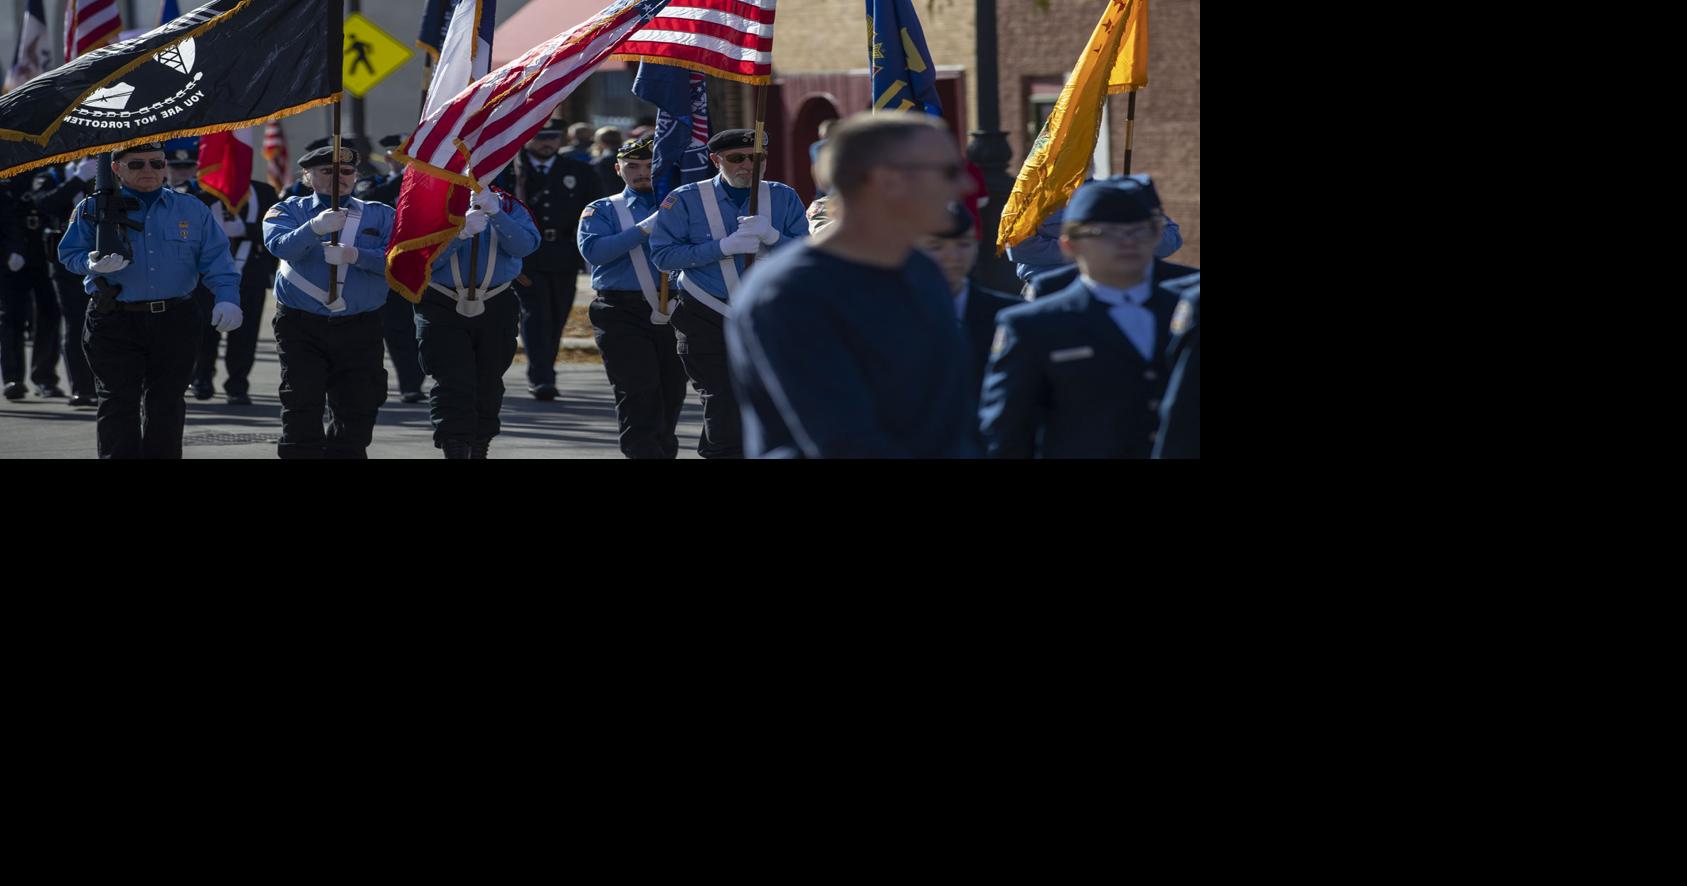 The Council Bluffs Veterans Day Parade will be held Saturday